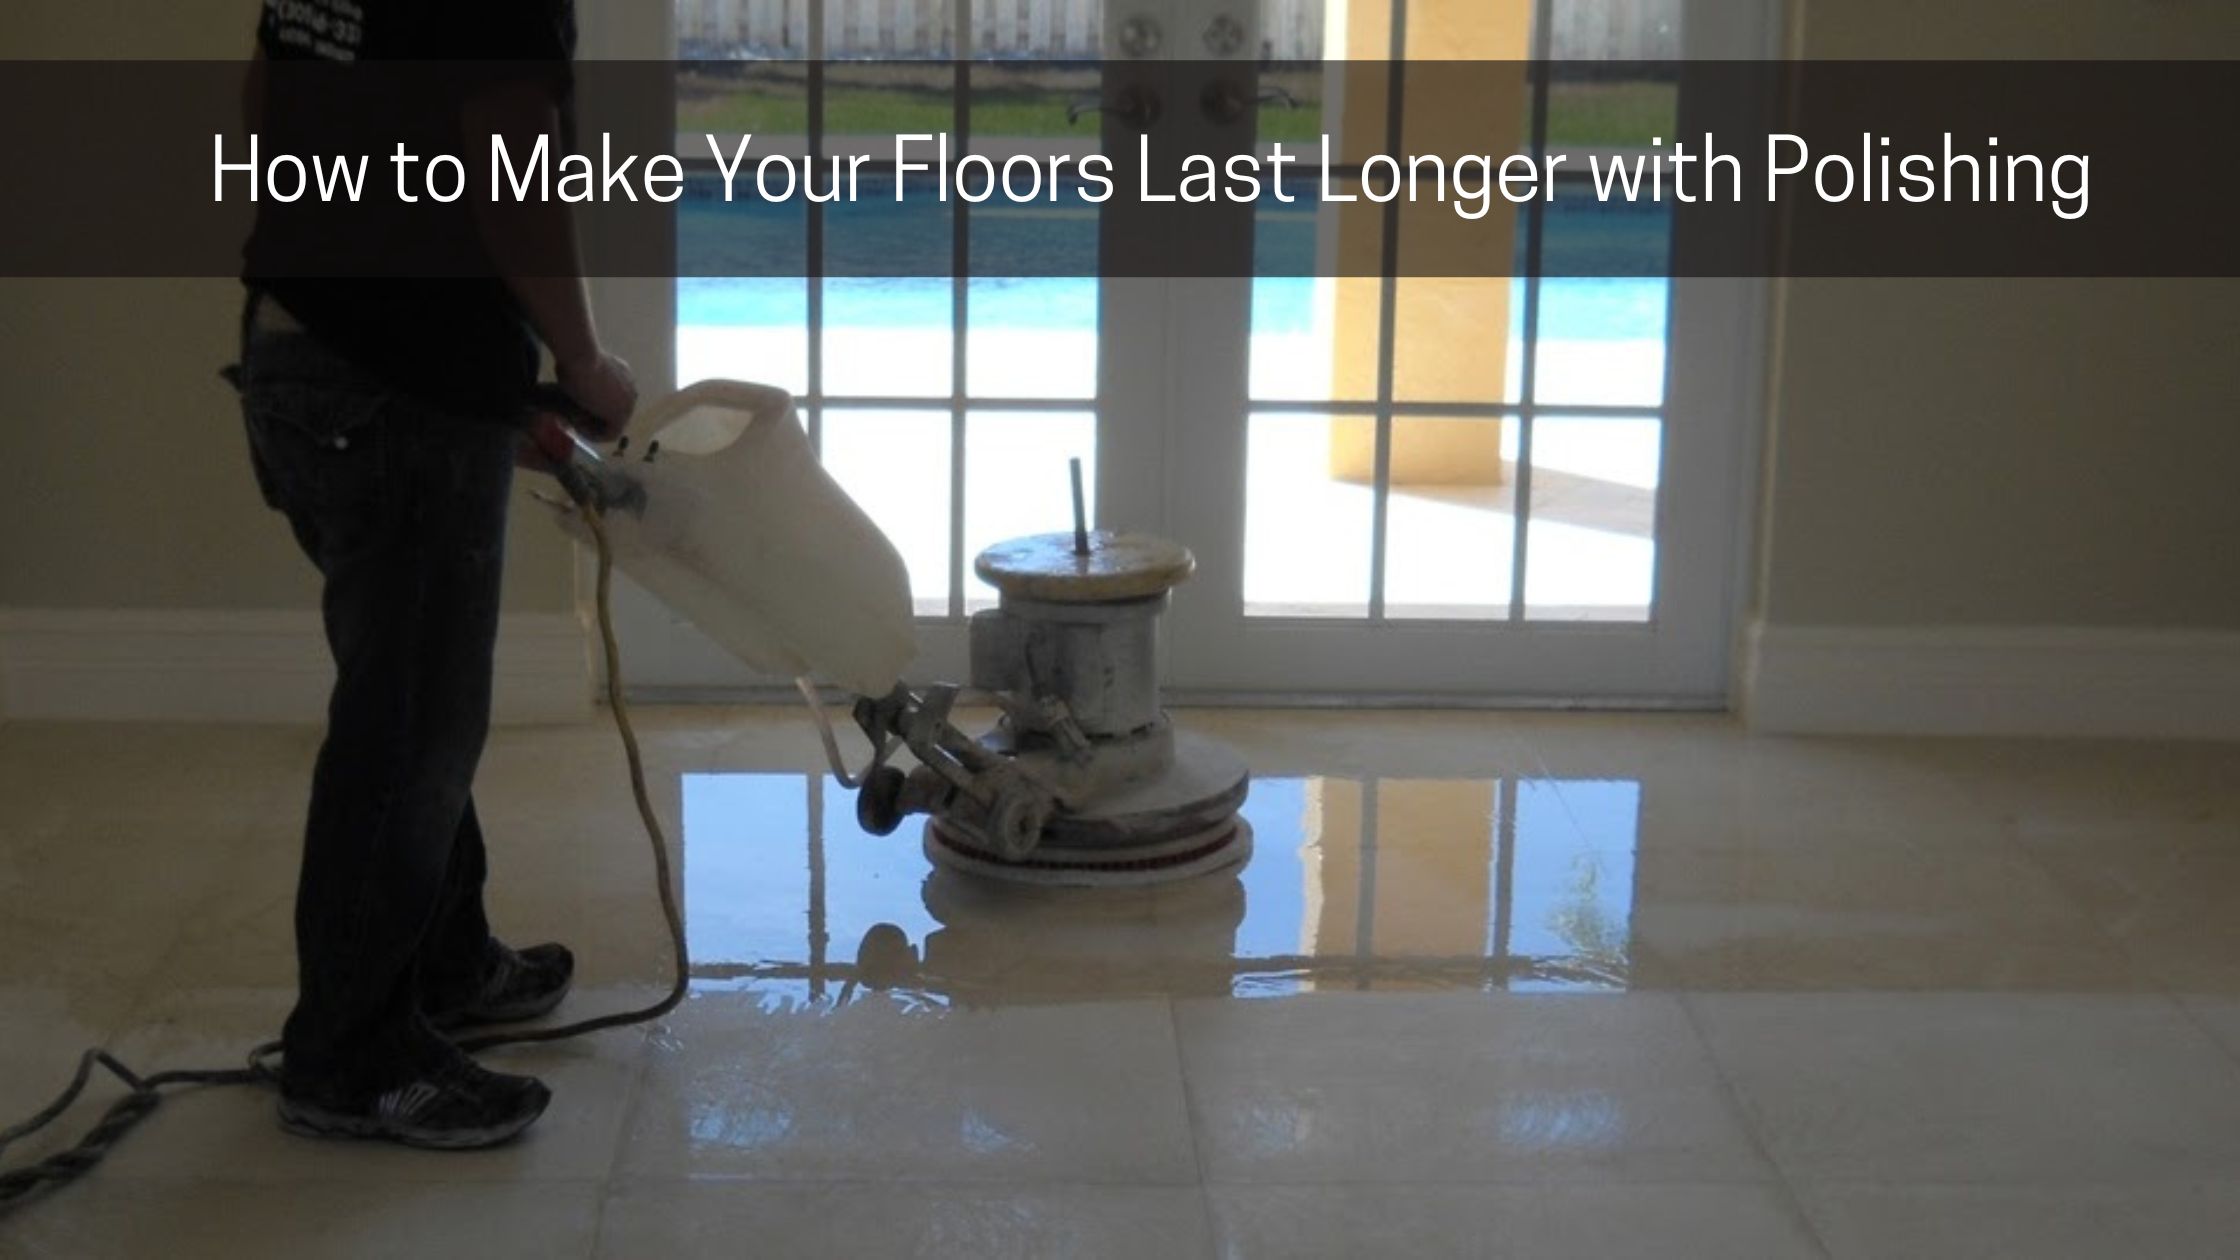 How to Make Your Floors Last Longer with Polishing